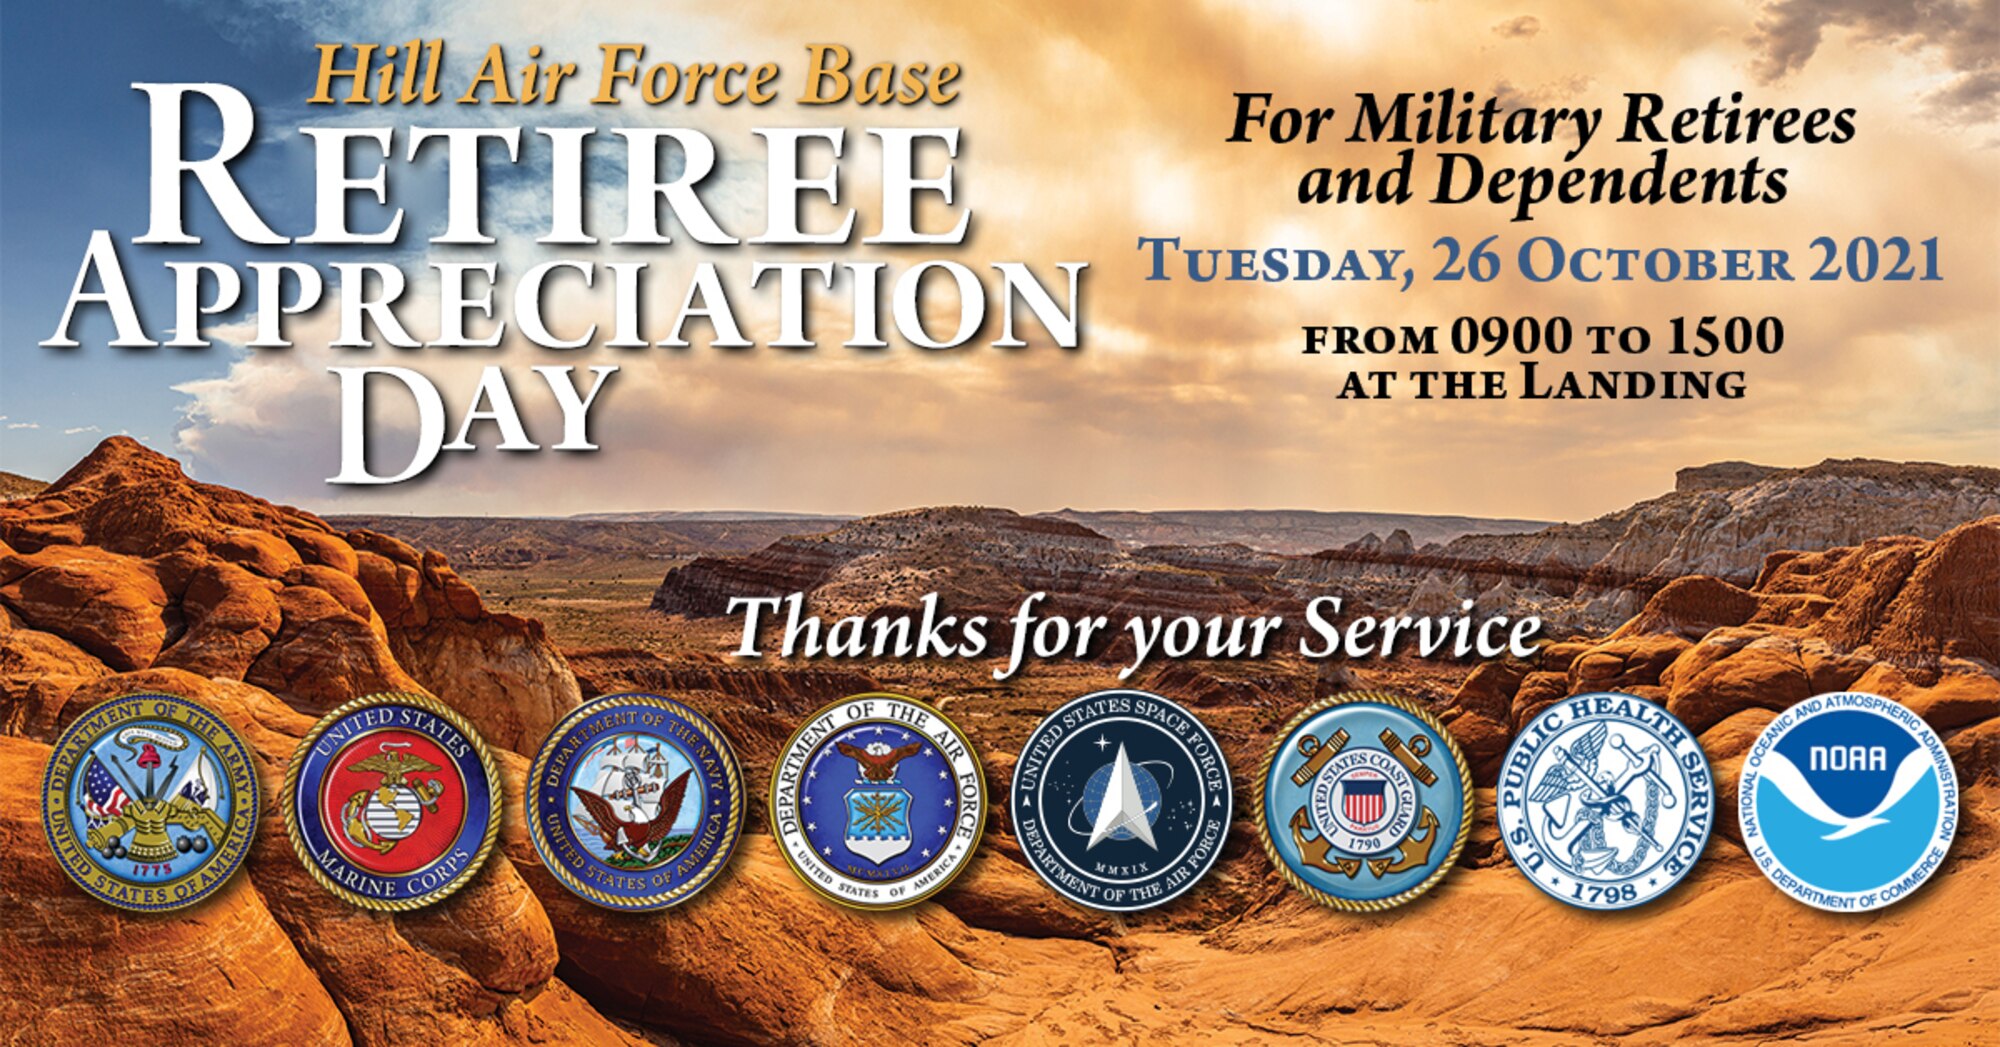 Retiree Appreciation Day returns to Hill AFB Oct. 26 > Hill Air Force